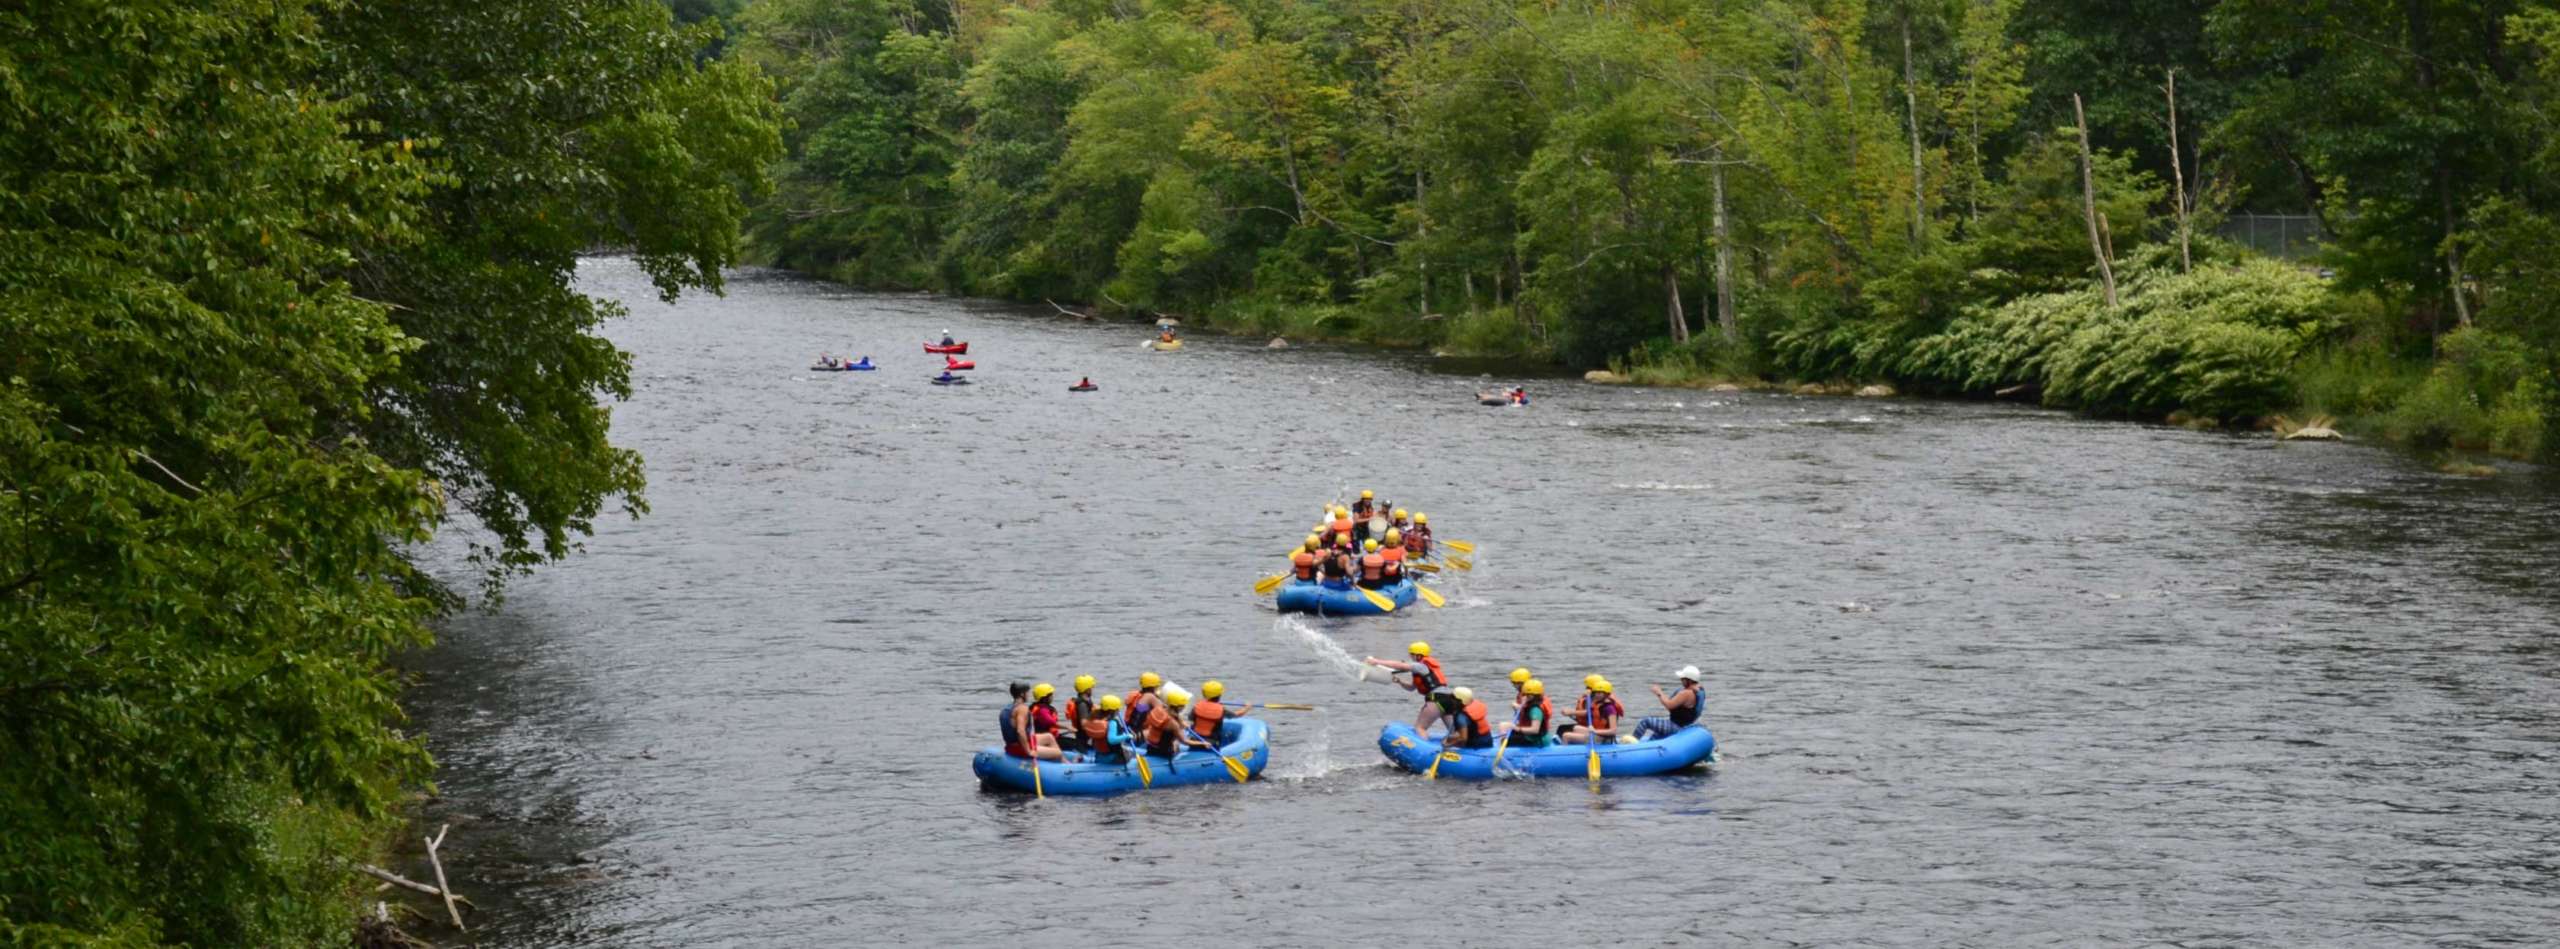 Three rafts floating down a river with rafters splashing each other with water